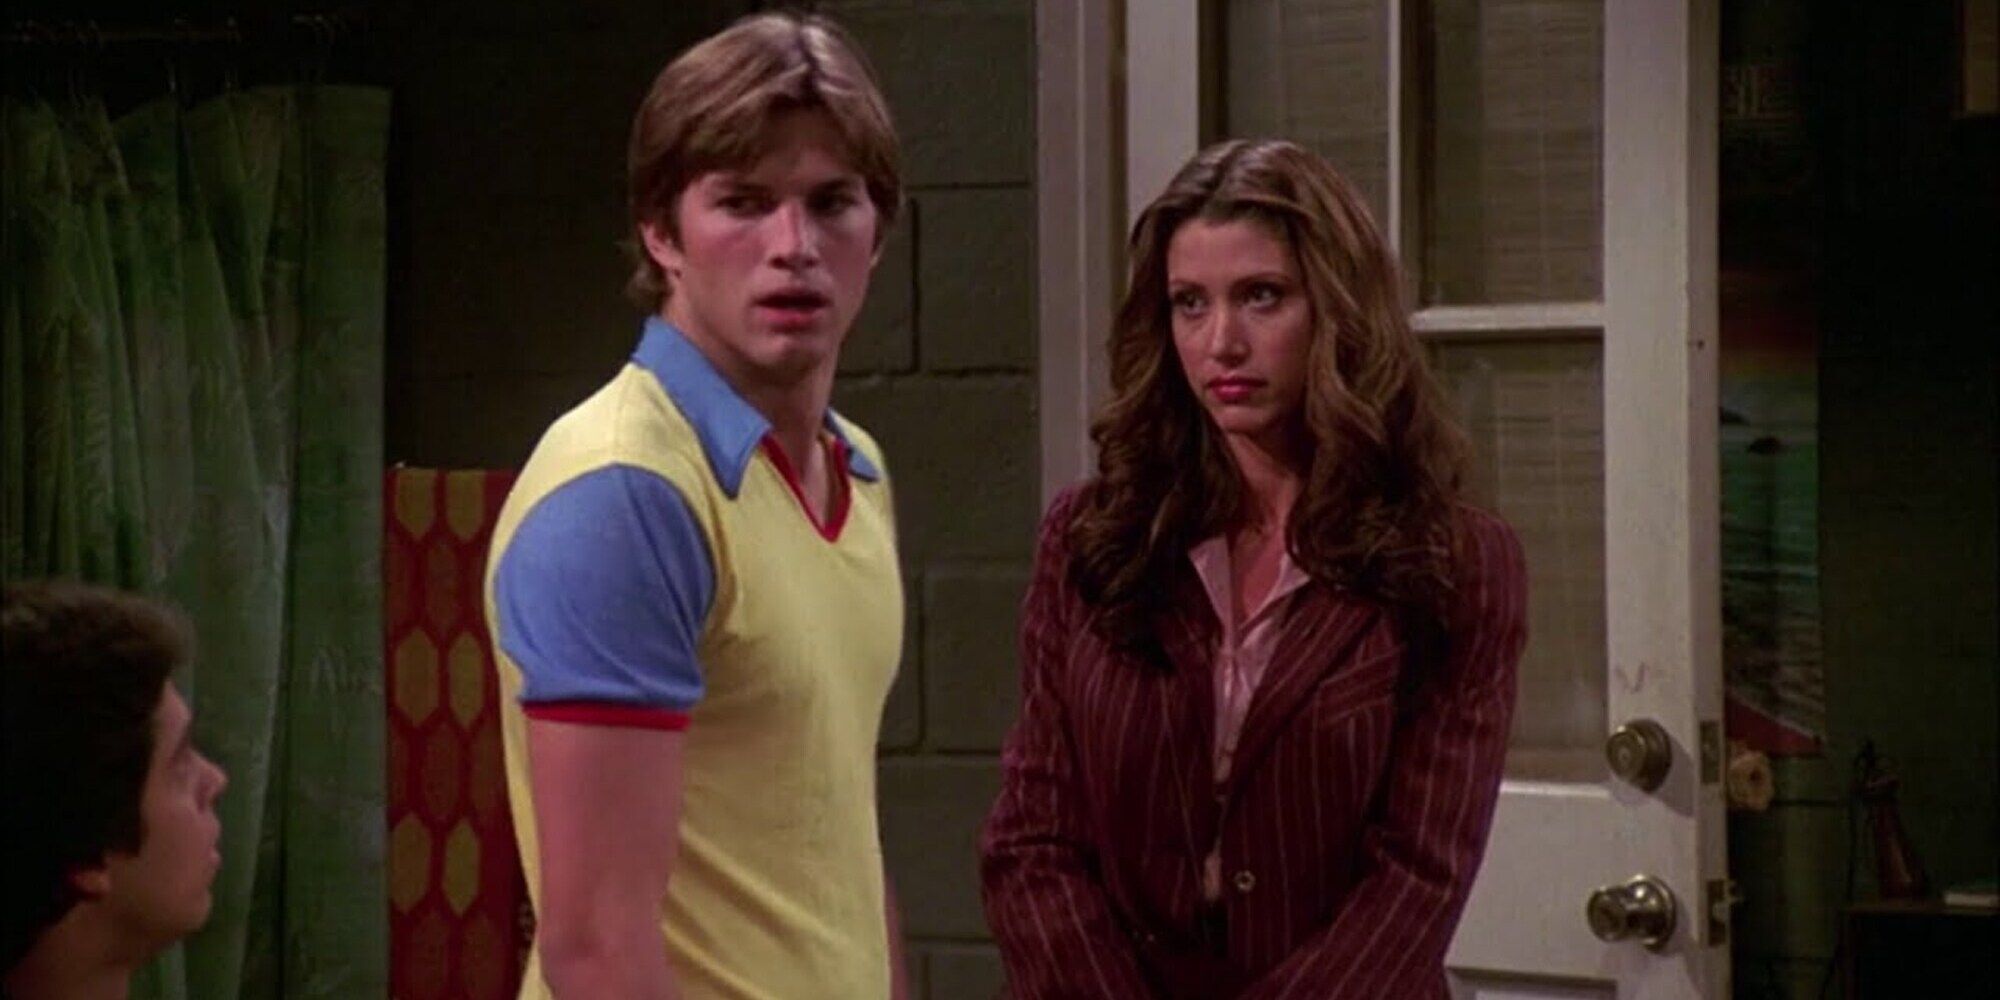 Kelso and Brooke in That '70s Show